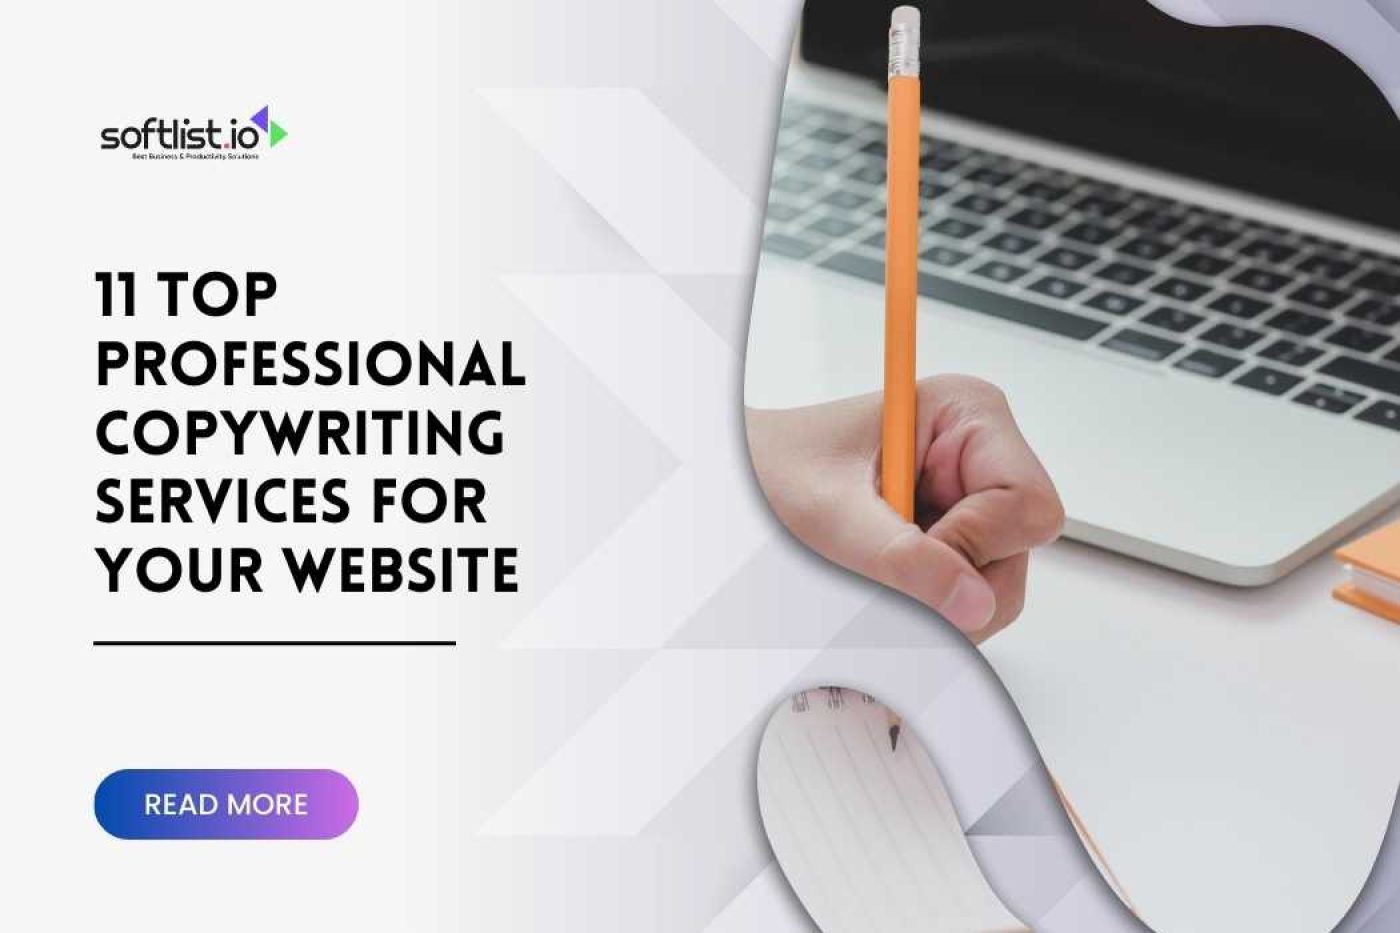 11 Top Professional Copywriting Services for Your Website